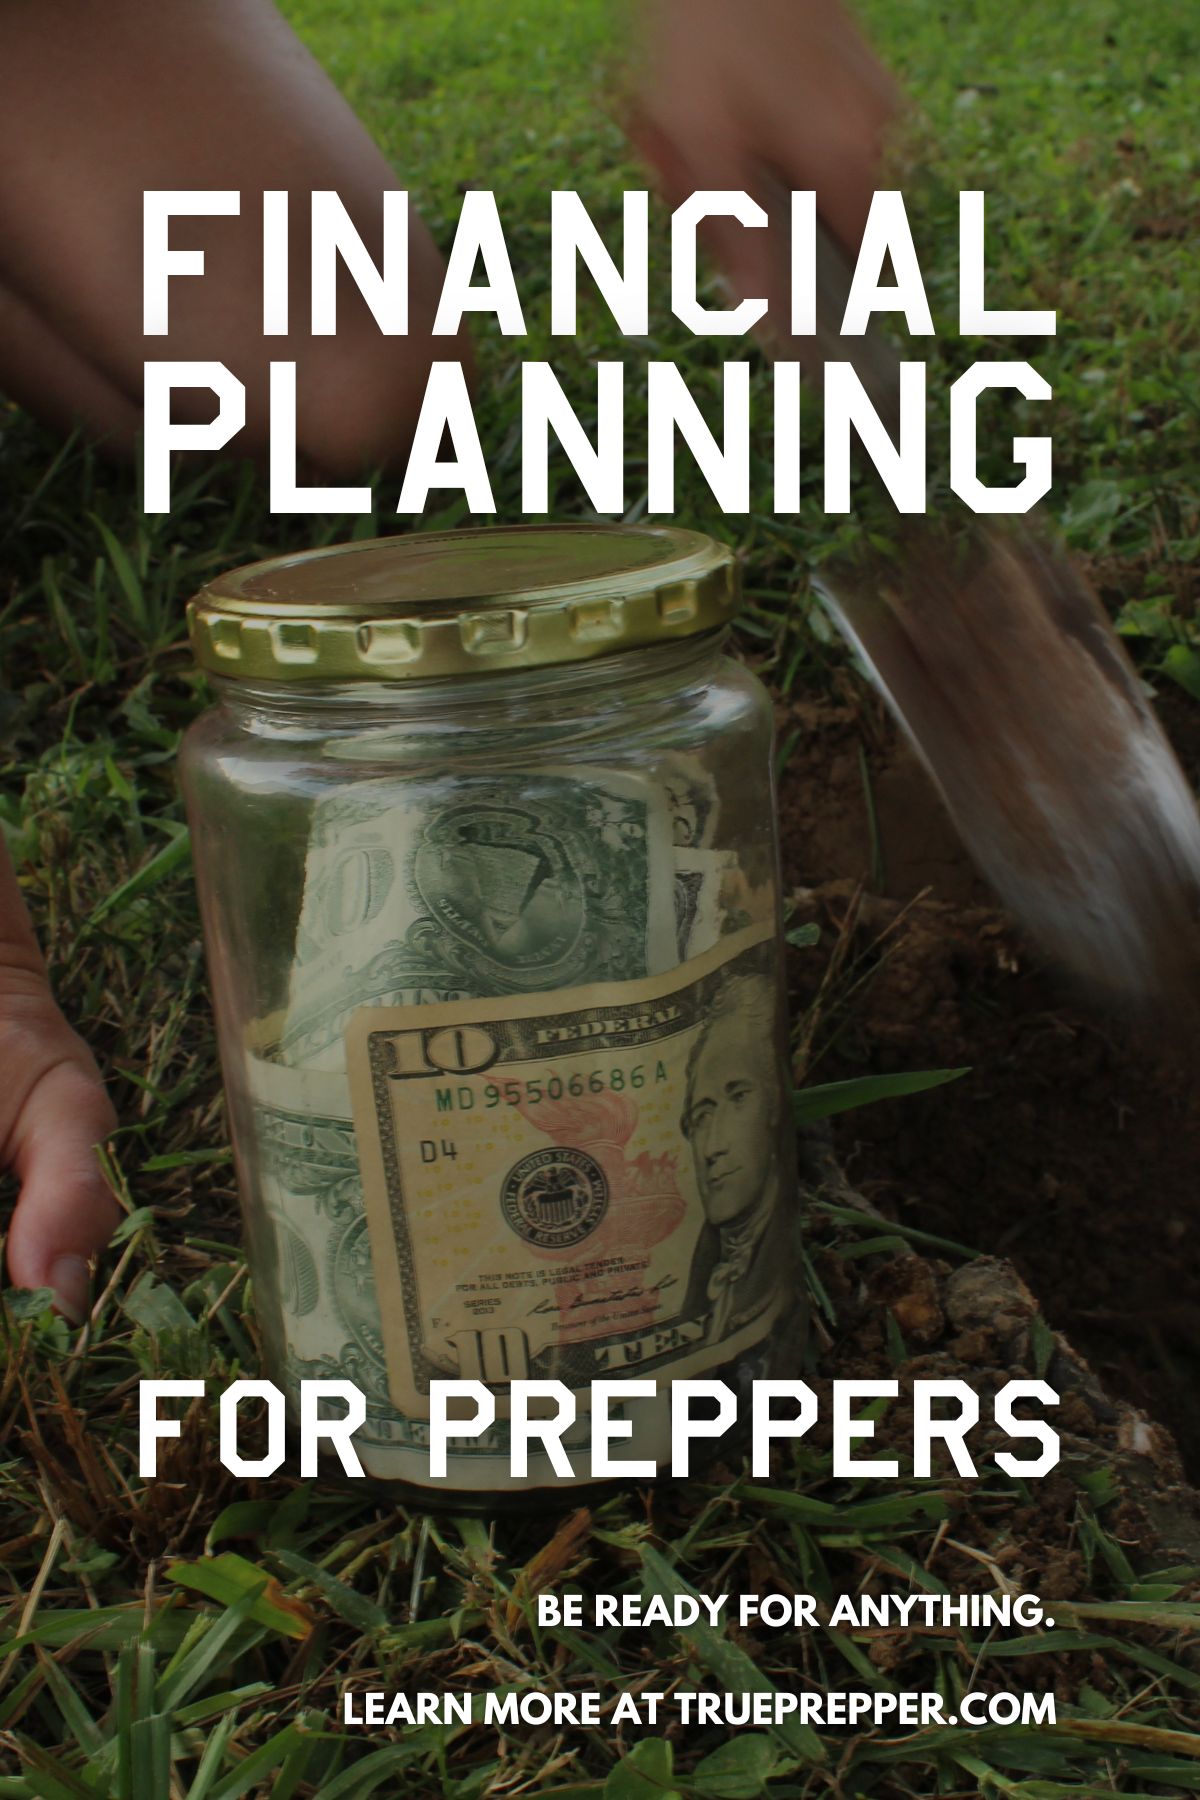 Financial Planning for Preppers